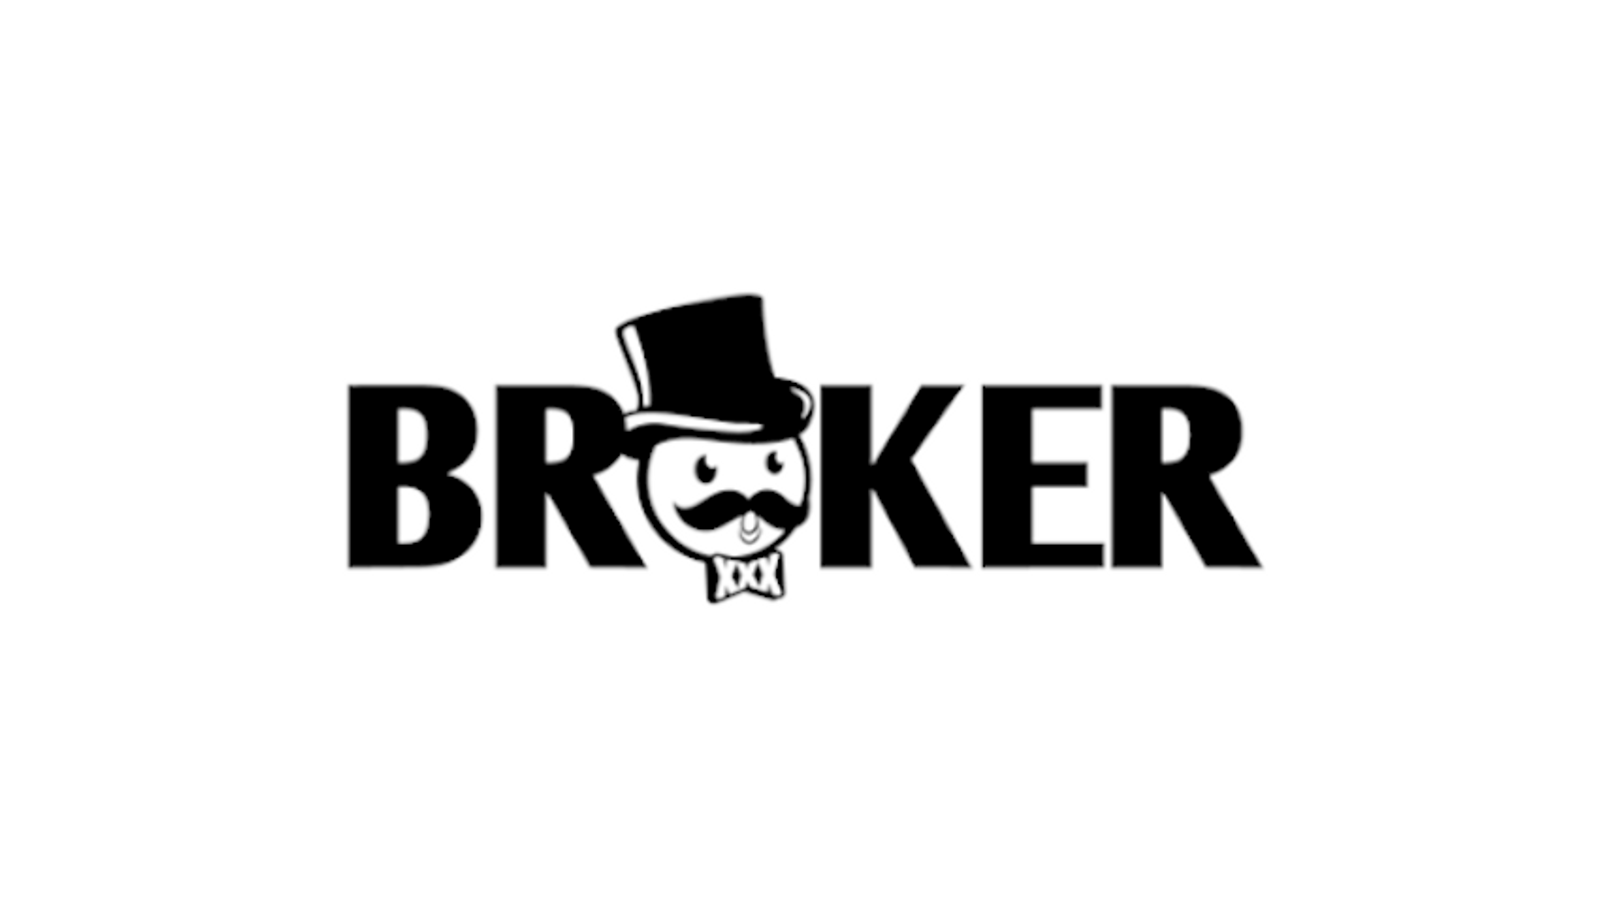 Broker.xxx Welcomes Banned eBay Domain Sellers